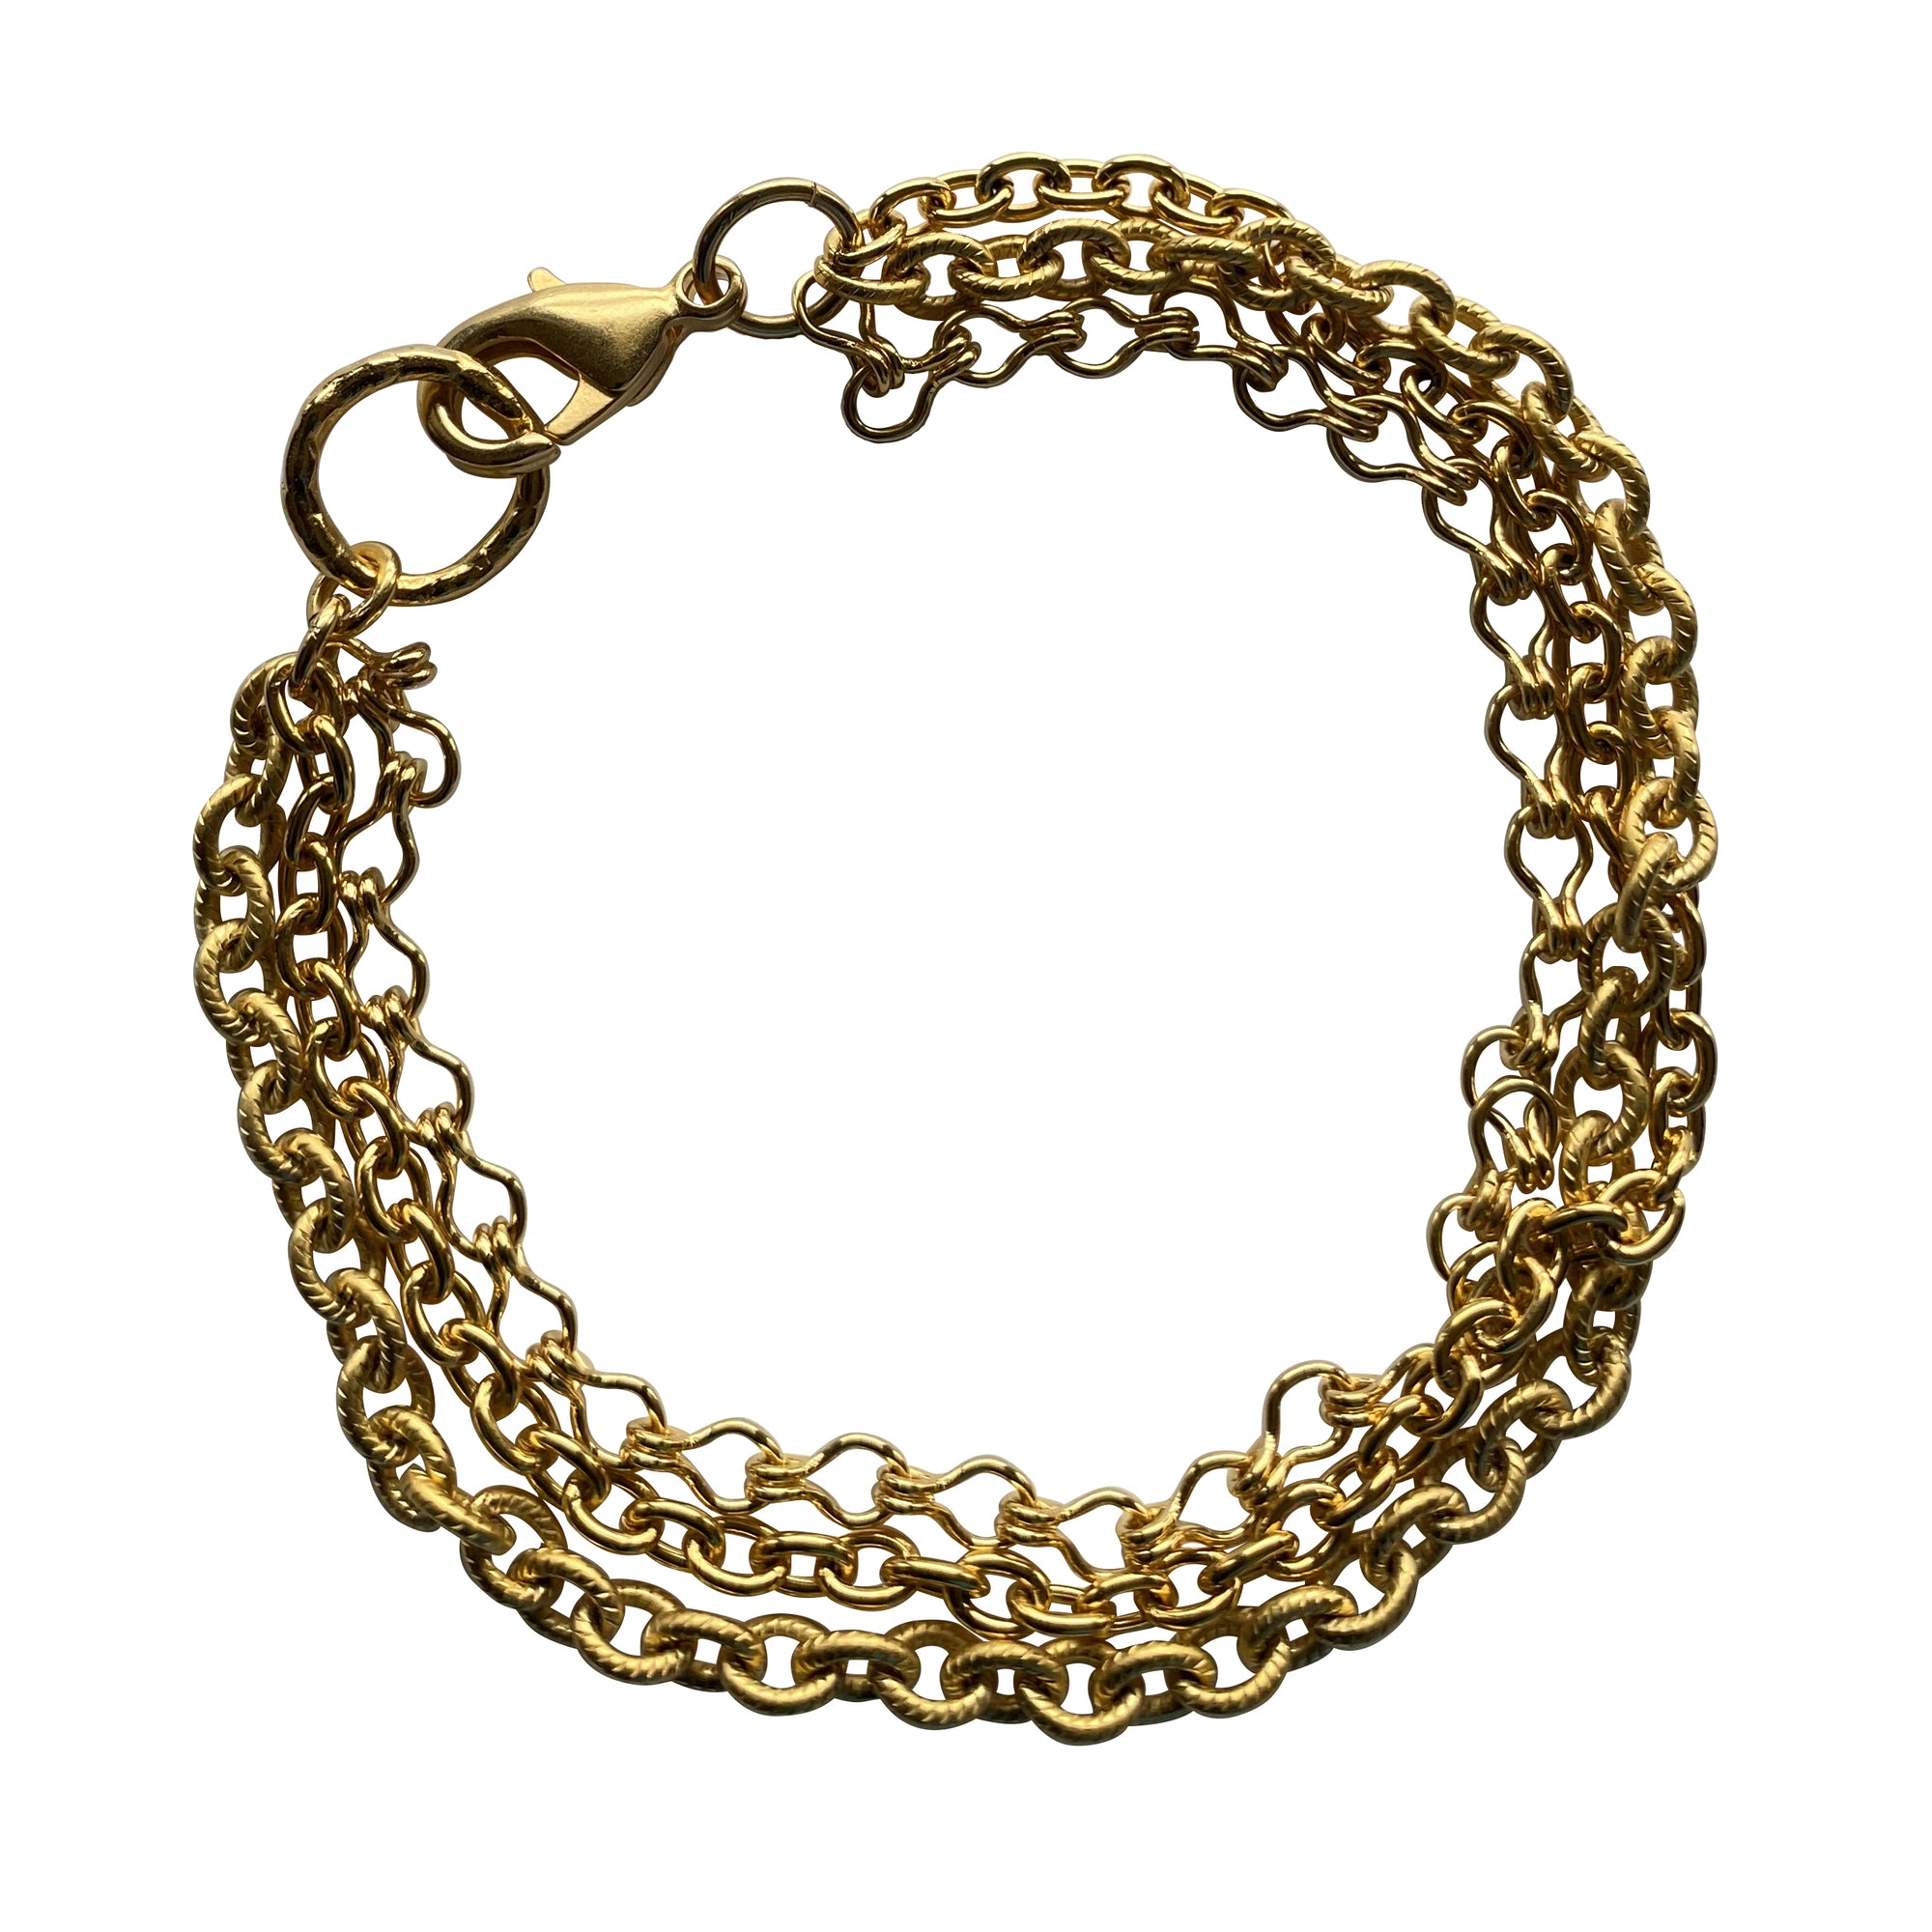 Three-chain Gold Link Bracelet with Lobster Clasp